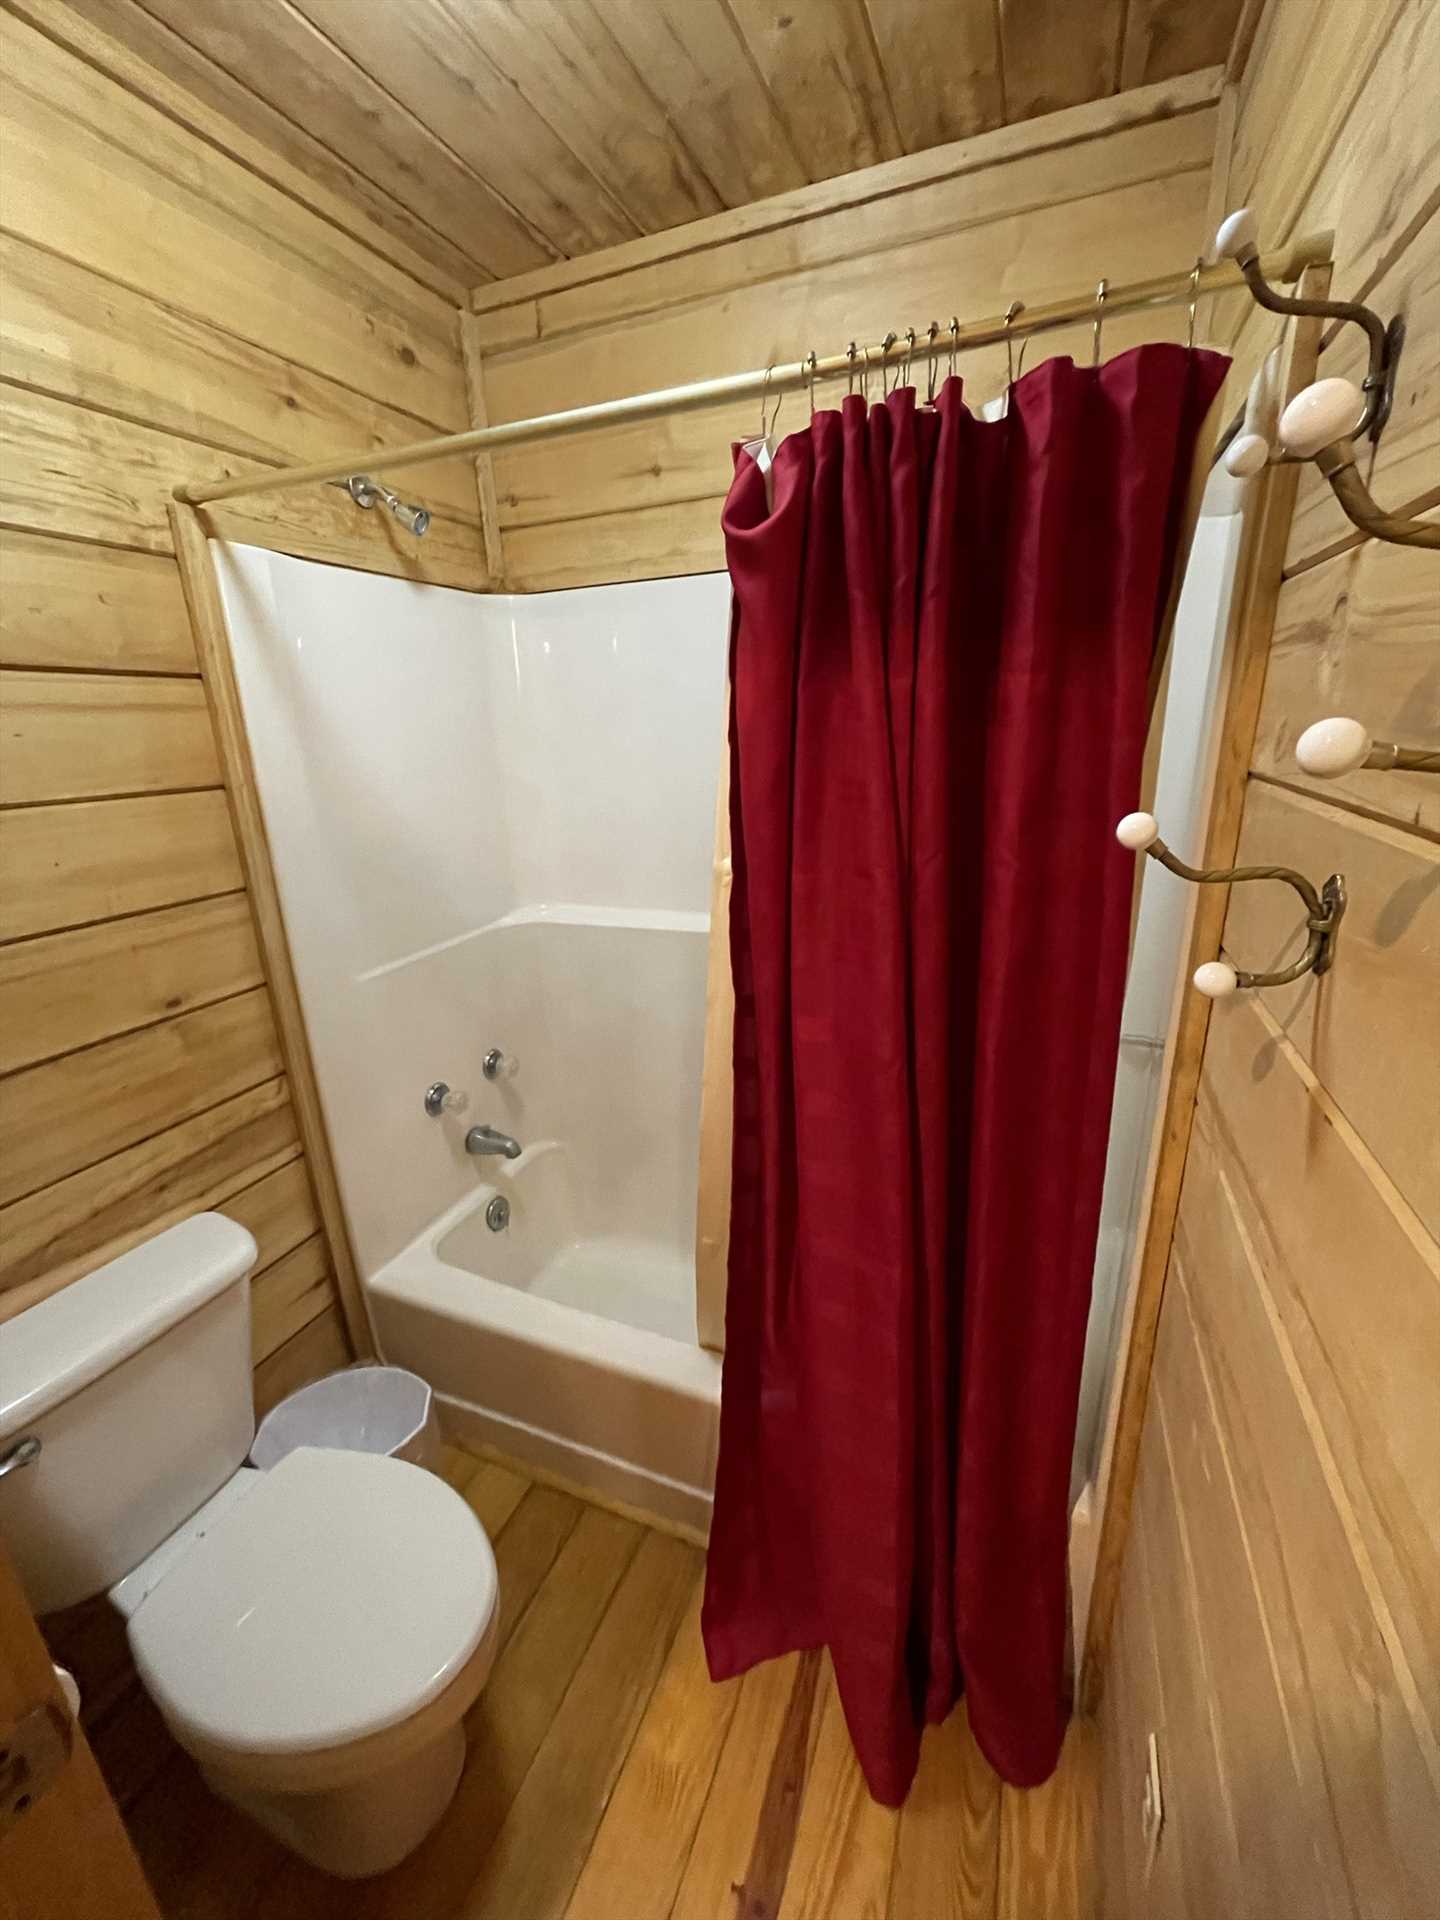                                                 With the Lodge's two bathrooms for six guests, there'll be no standing in line! Both baths include a spotlessly-clean tub and shower combo.